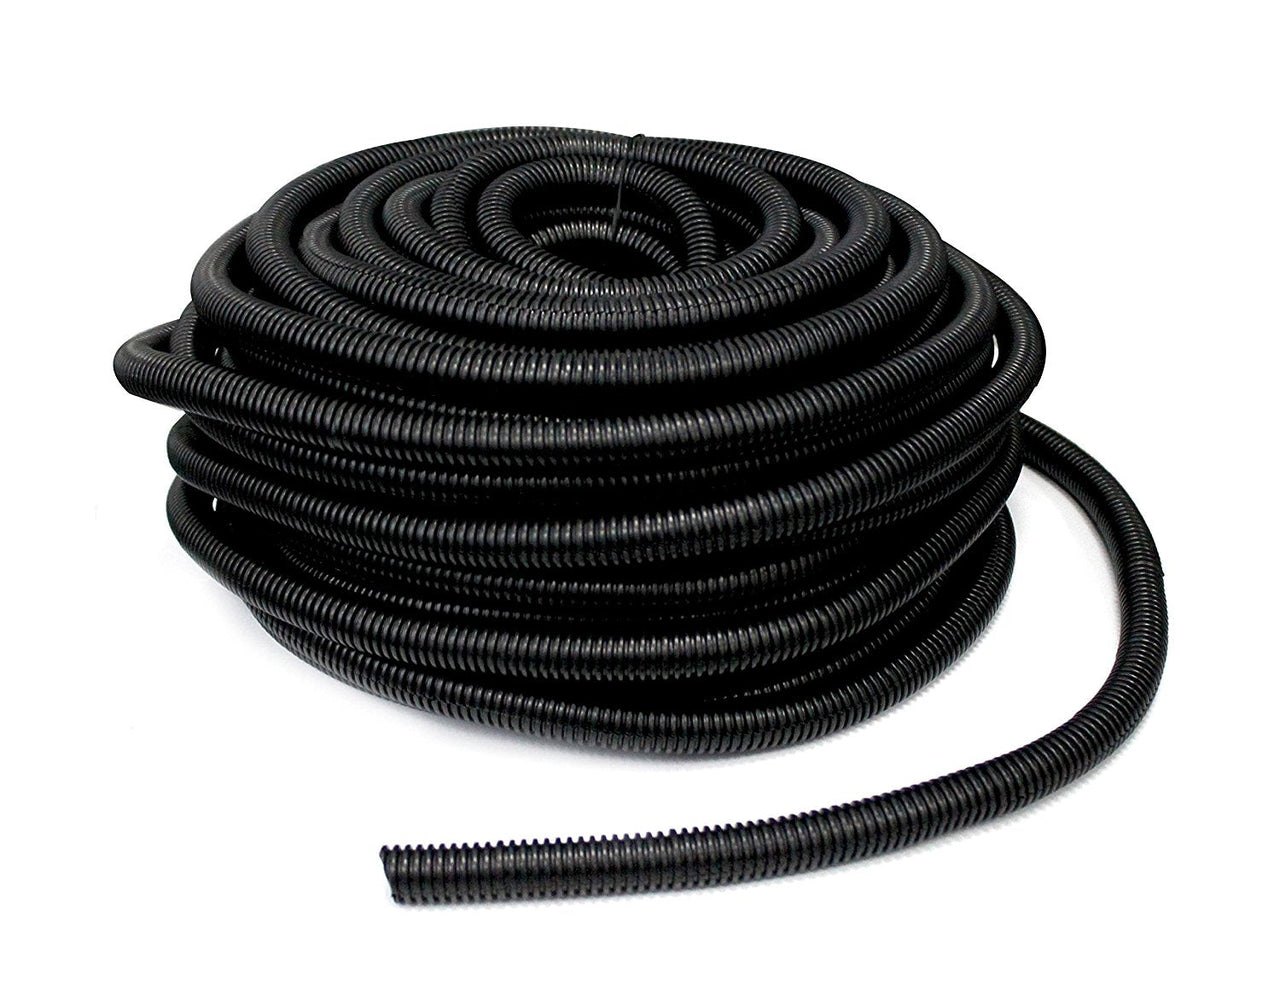 1/4" Black Split Loom Wire Hose Flexible Tubing Wire Cover Audio Stereo - (200' FT)